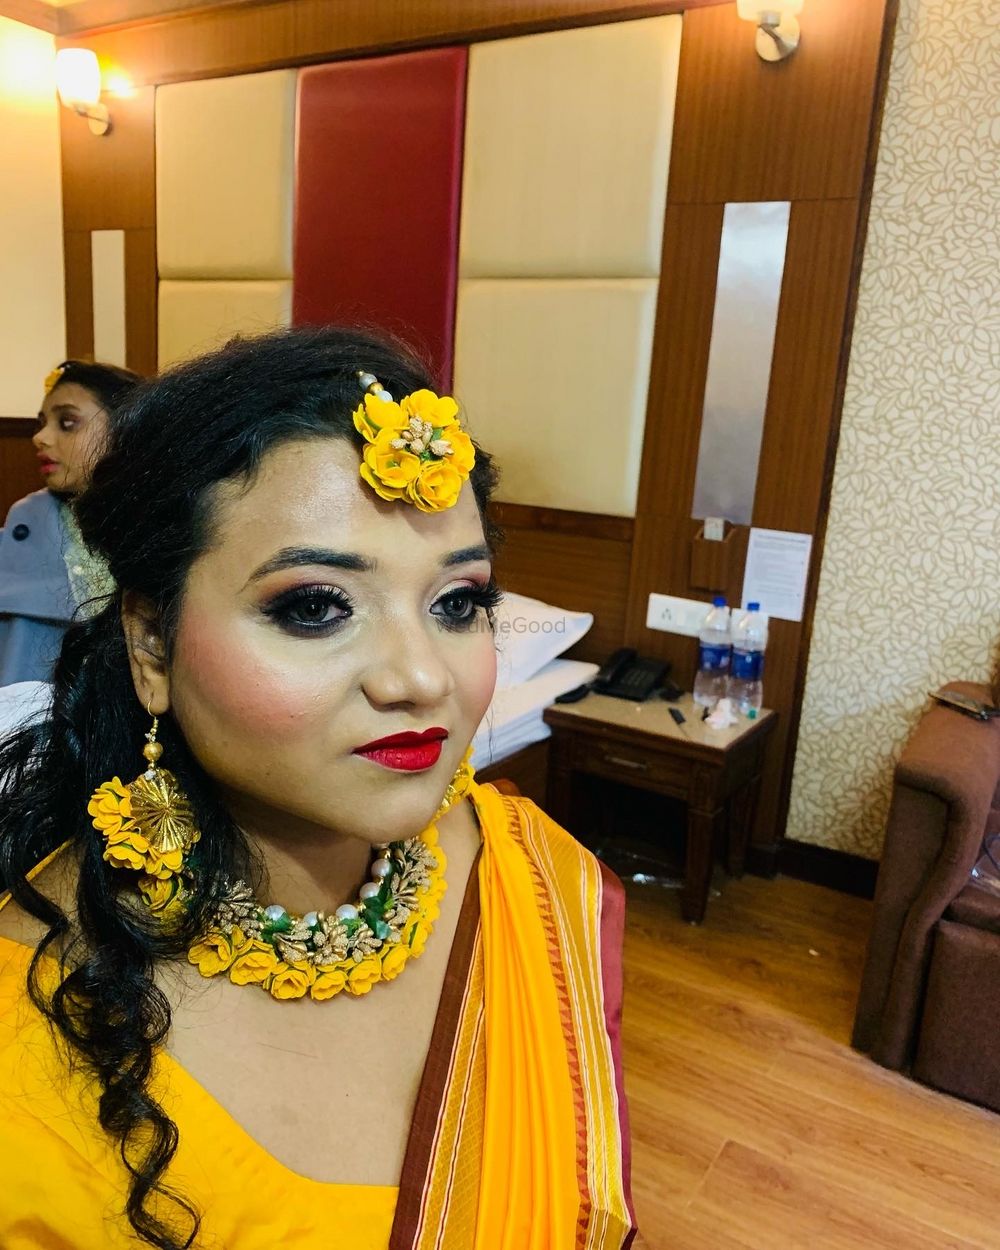 Photo From Bride - Engagement Bride 2020-2021 - By Anjali's Makeover